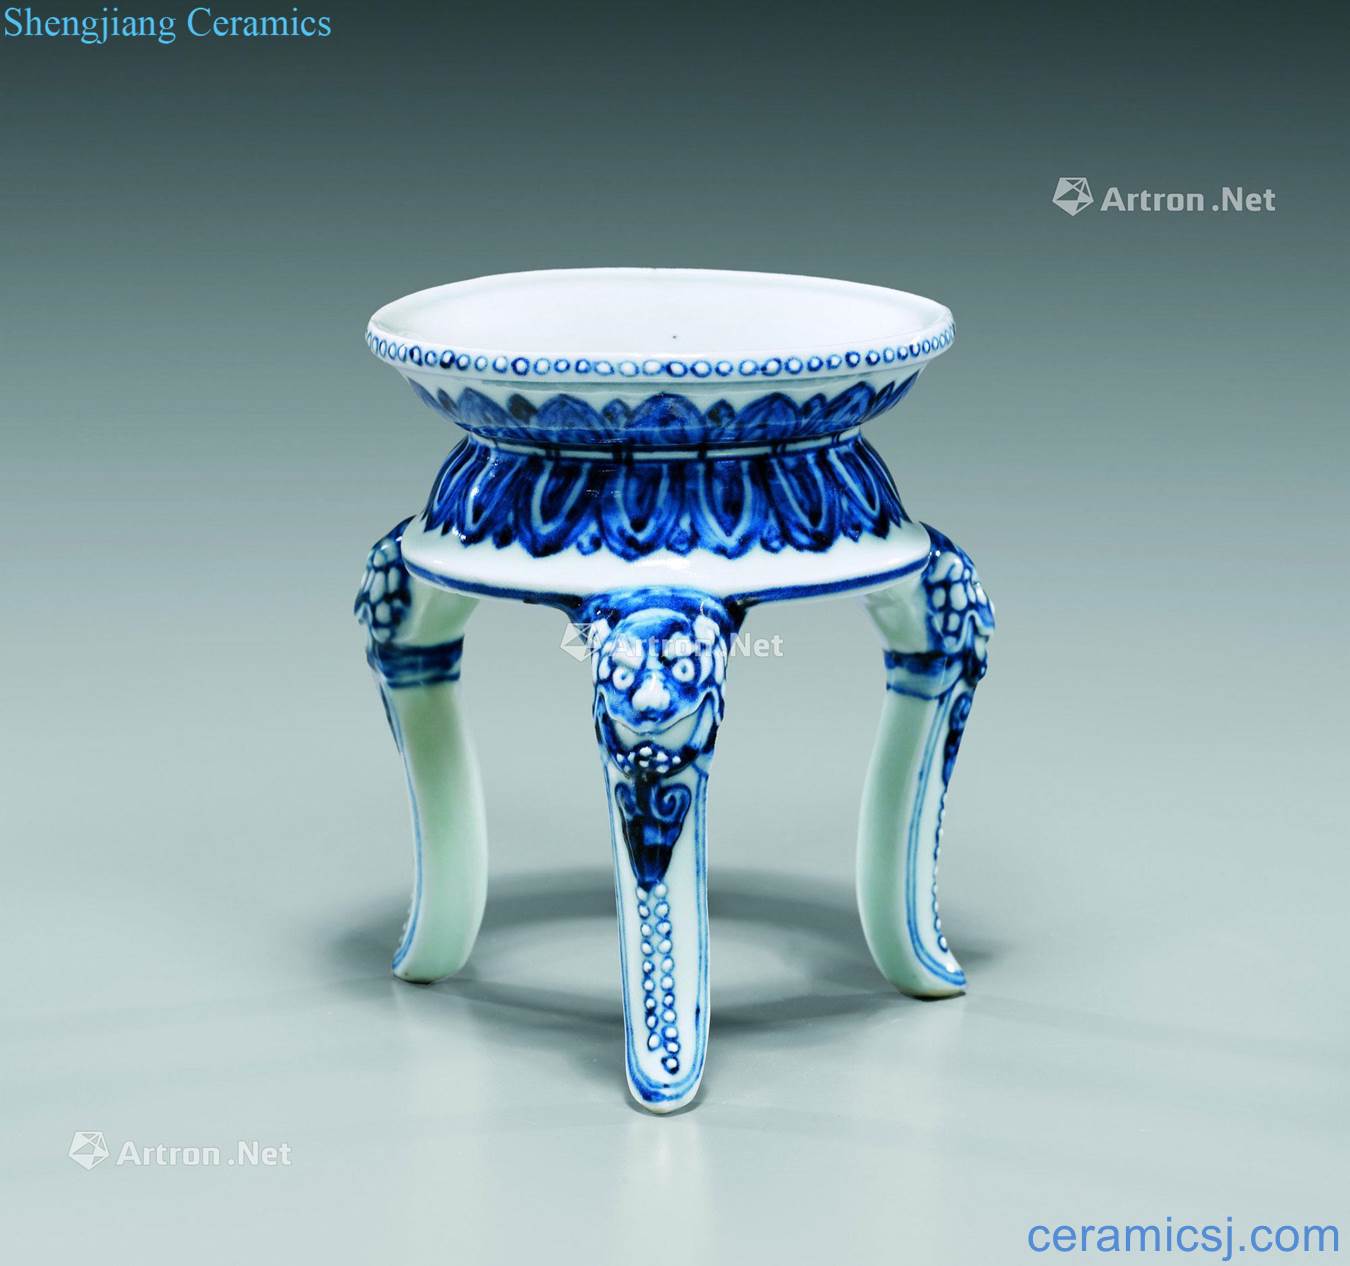 The Ming dynasty Yongle blue and white porcelain tripod